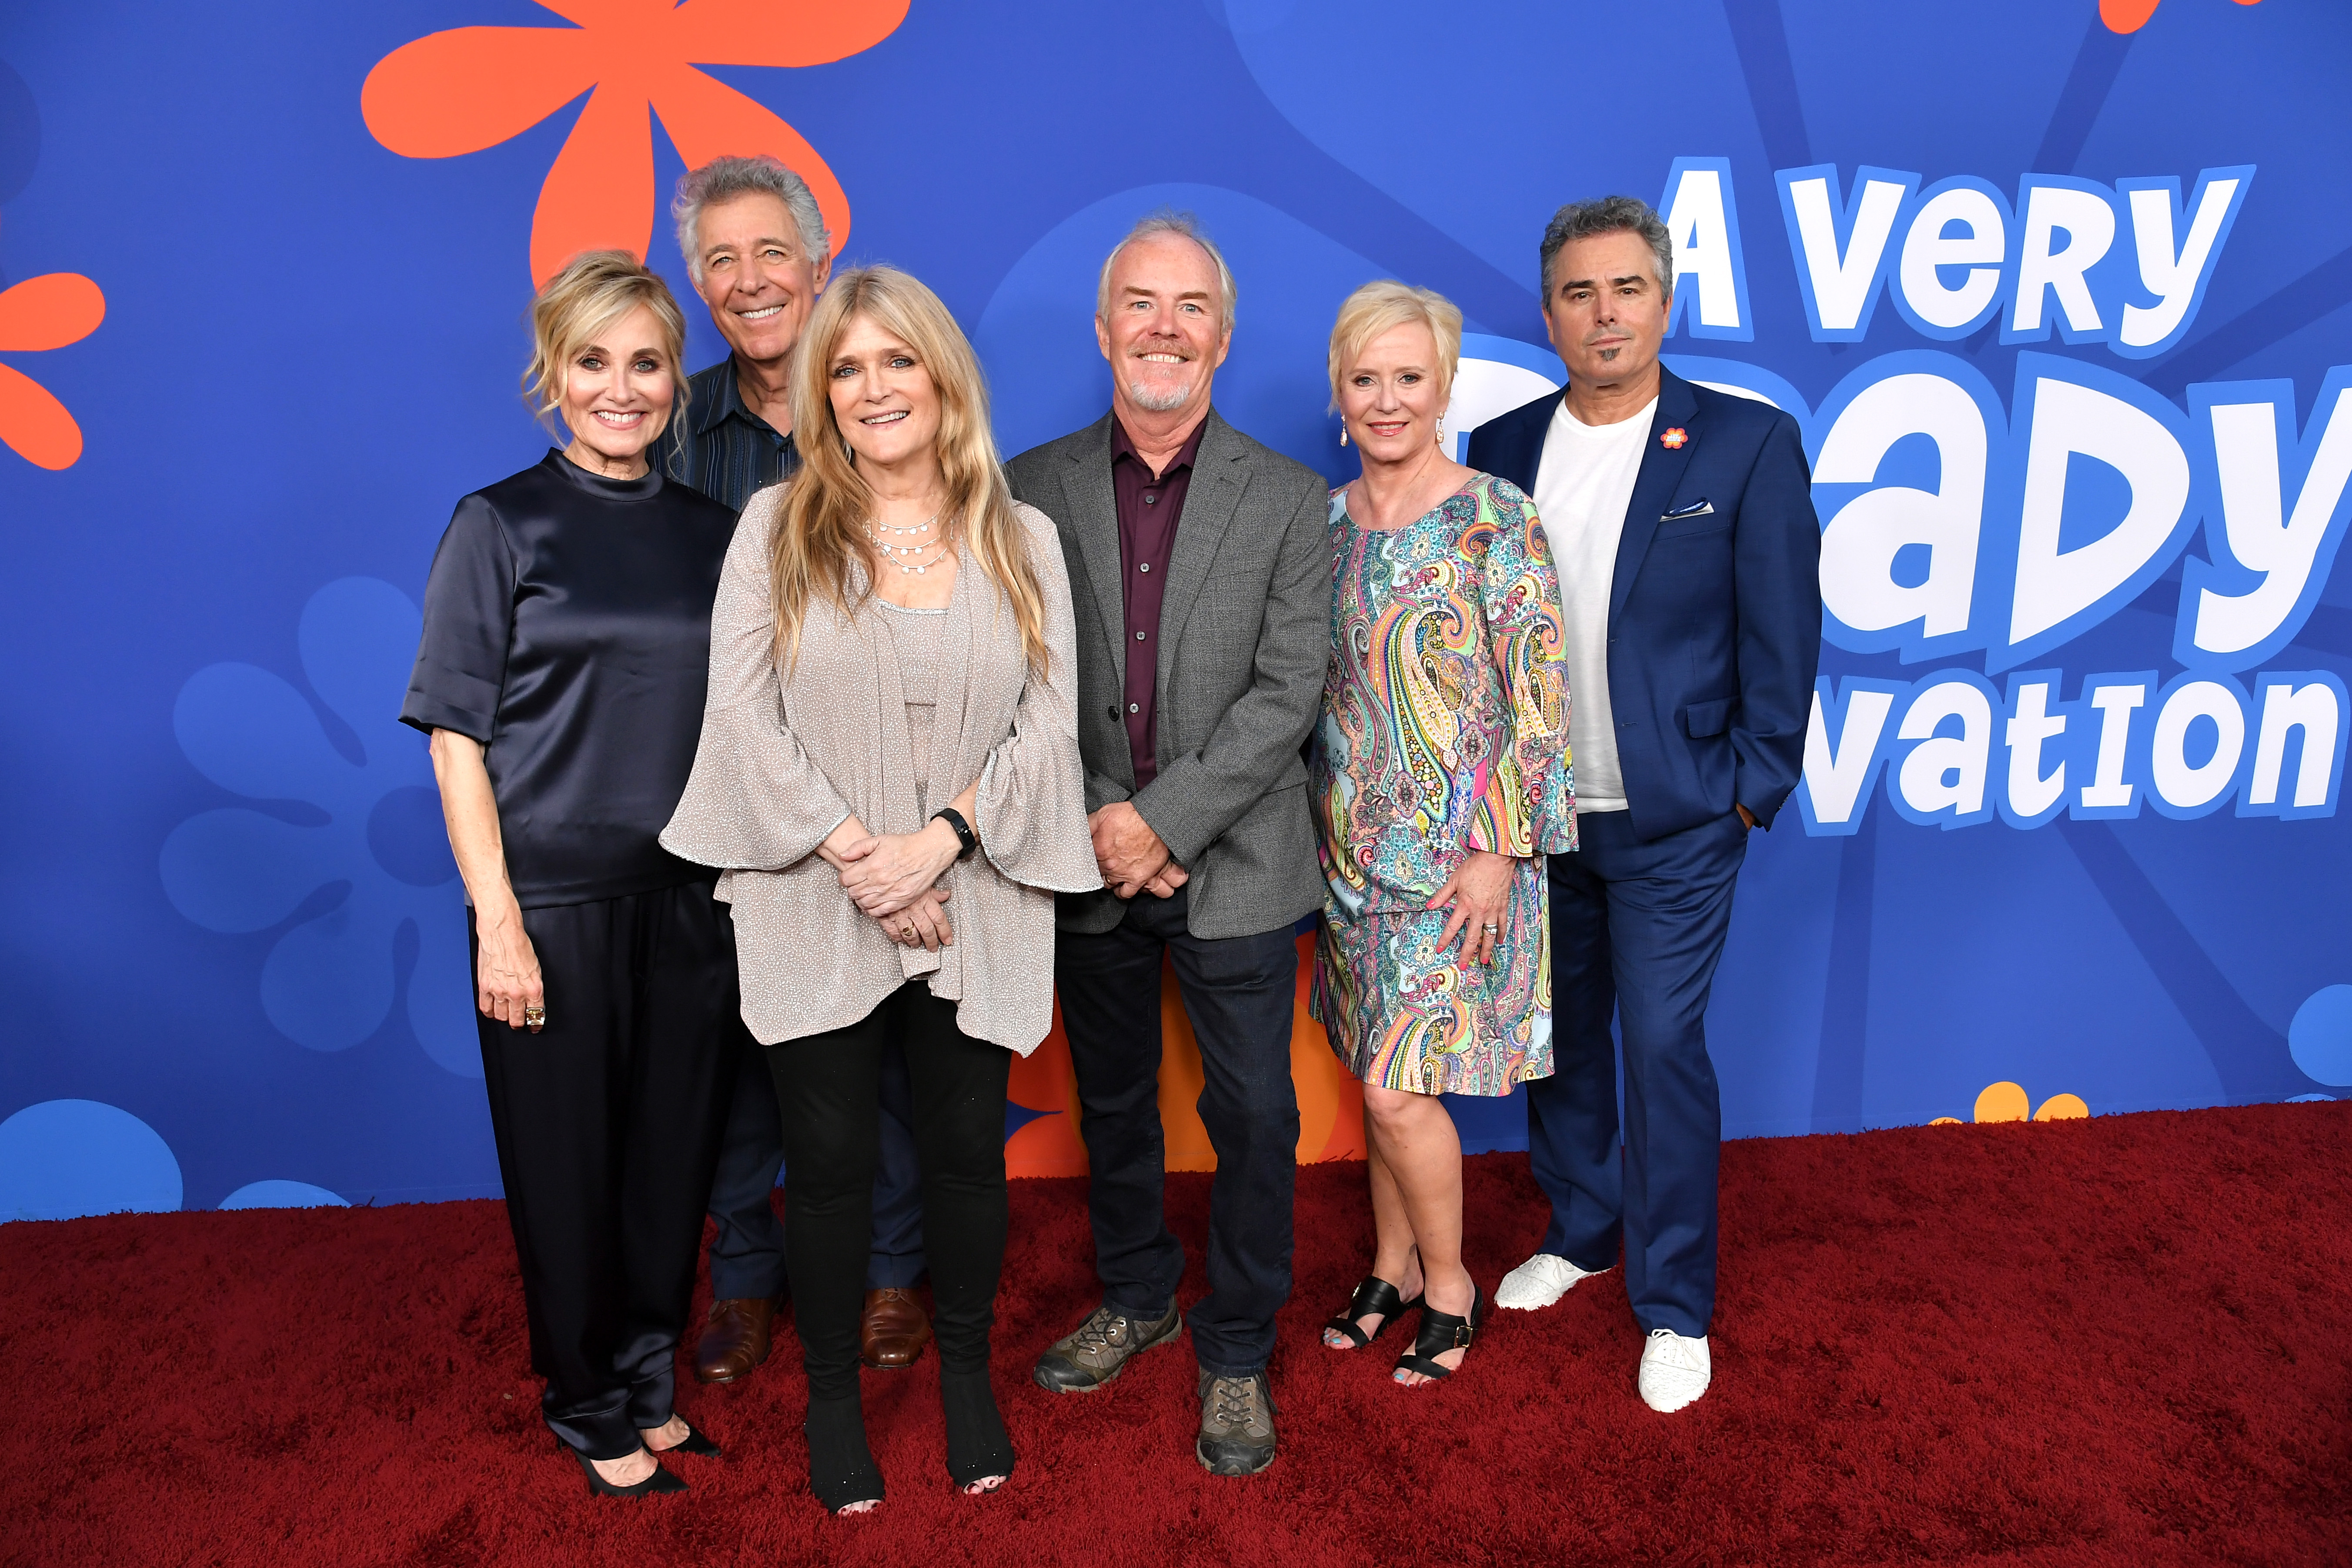 The Brady Bunch': How Maureen McCormick 'Rebelled Quietly' in a Few Episodes